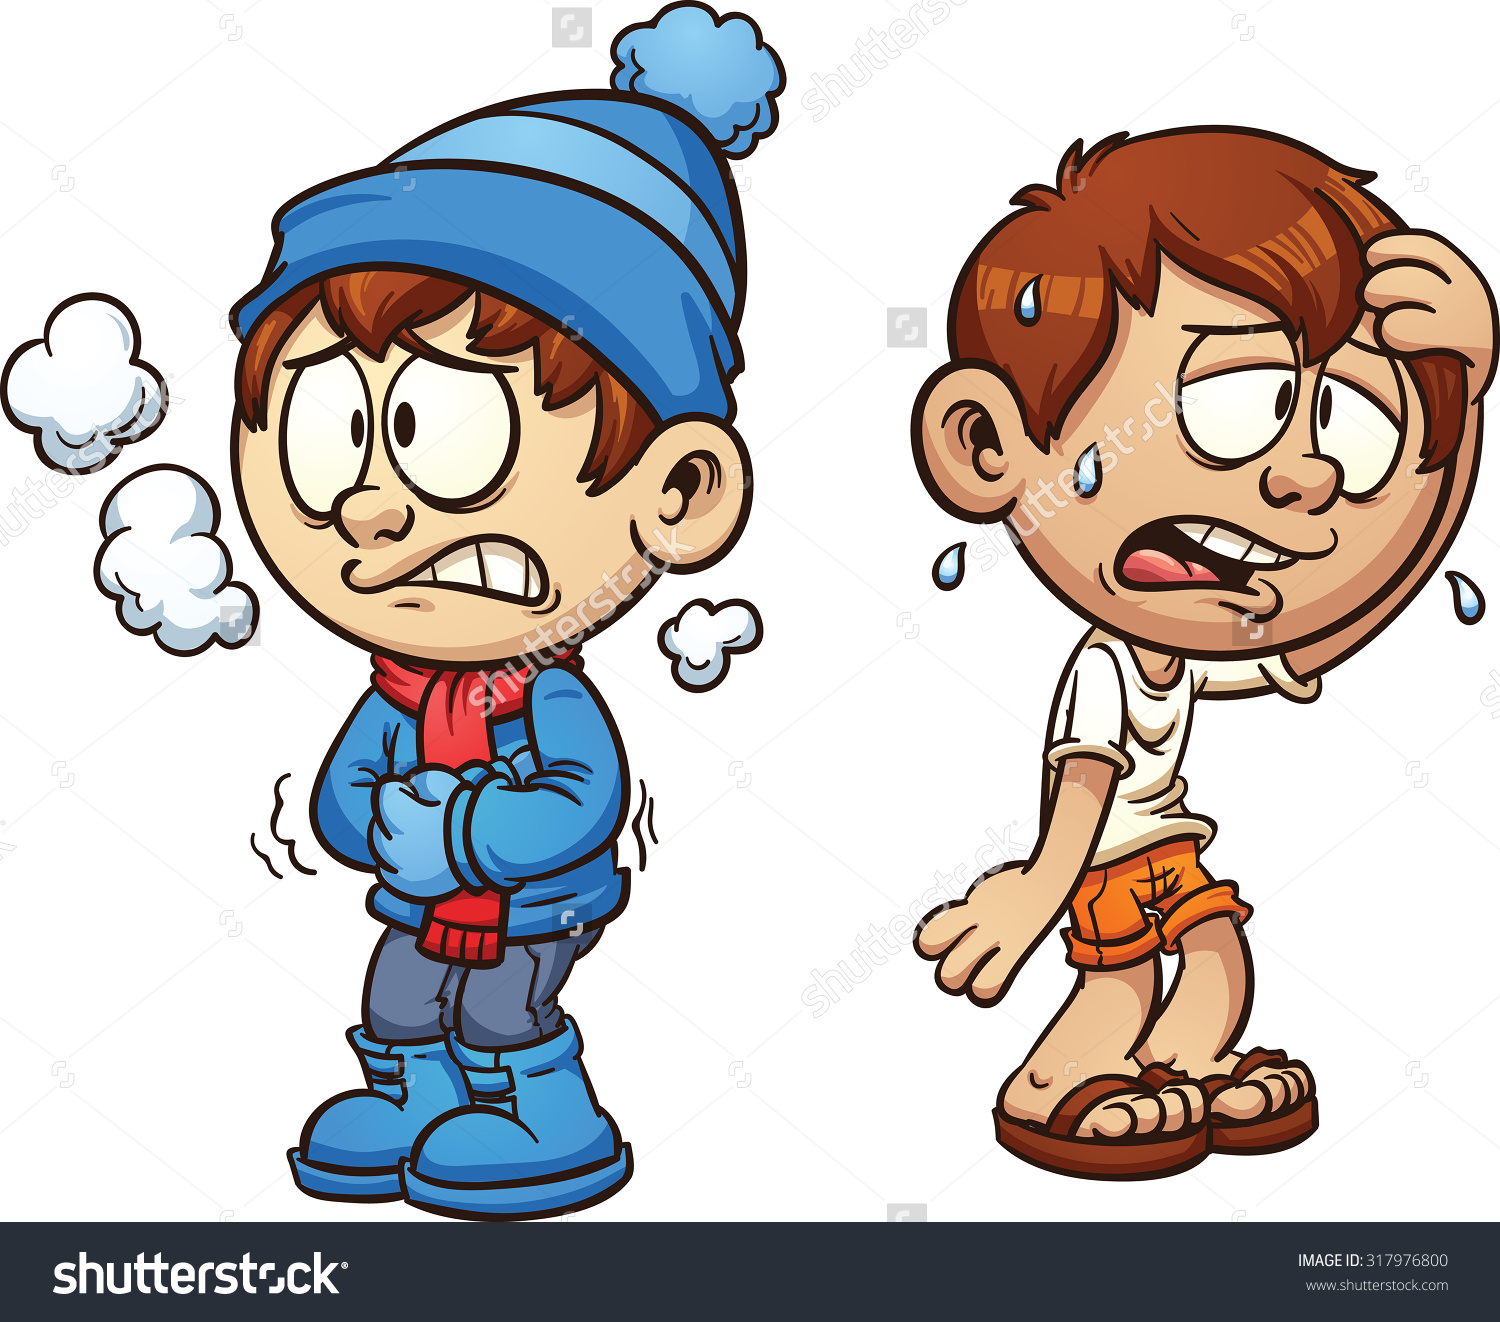 Coldness clipart #1, Download drawings